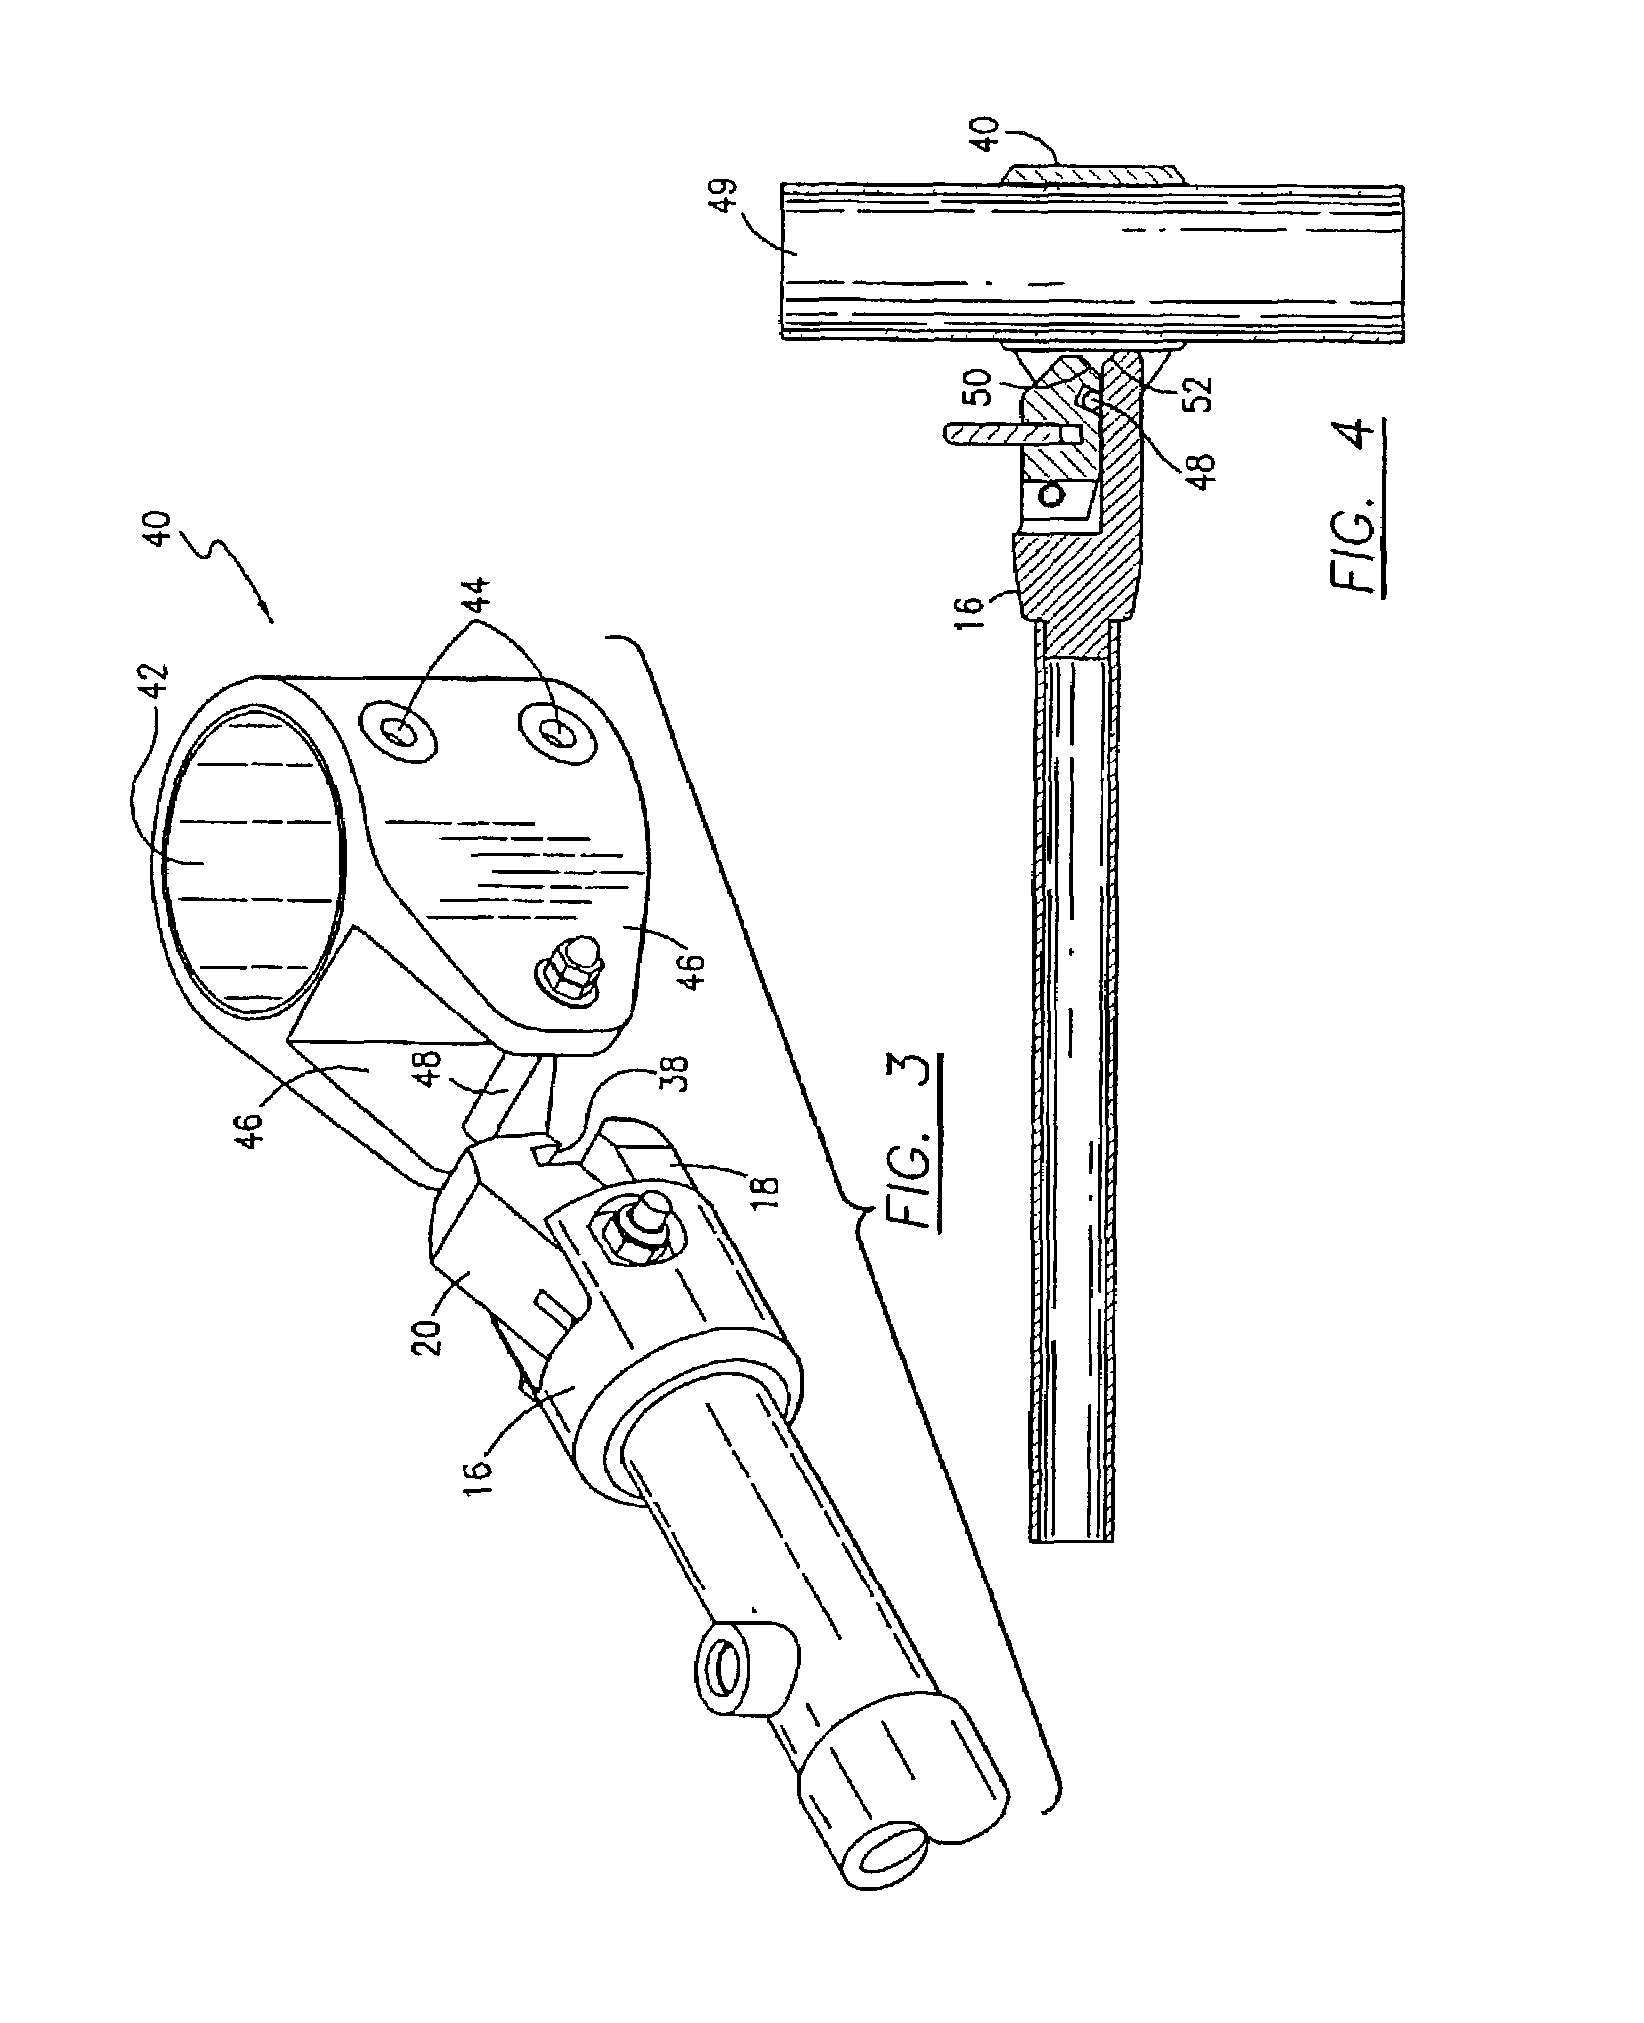 Automatic outrigger lock